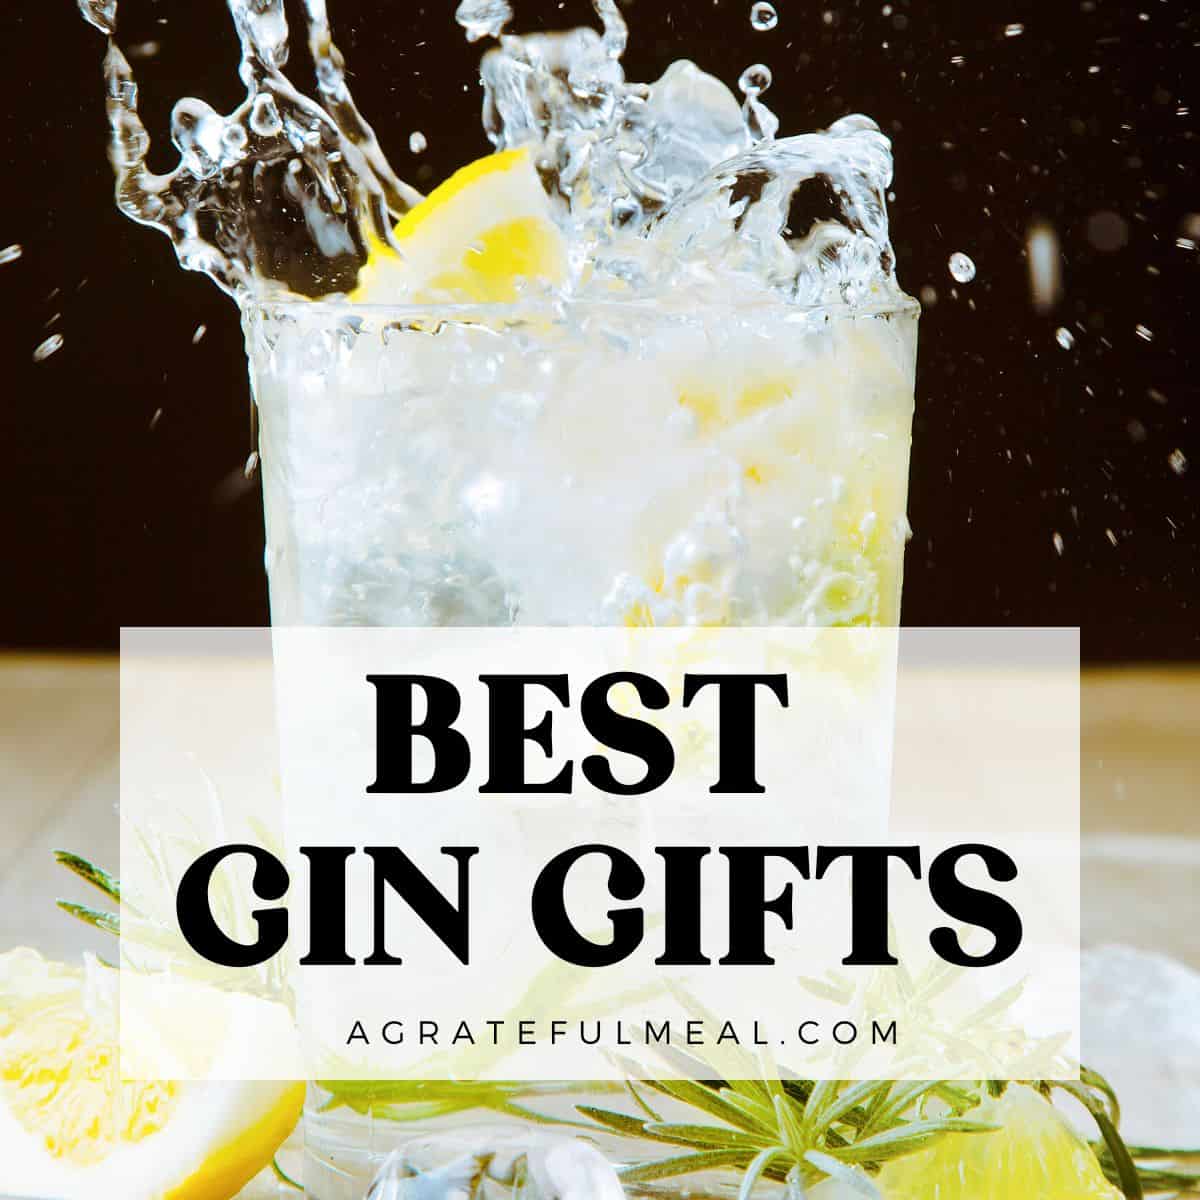 Image of a lemon slice falling and splashing into a cocktail with the words "Best Gin Gifts" in text overlay.